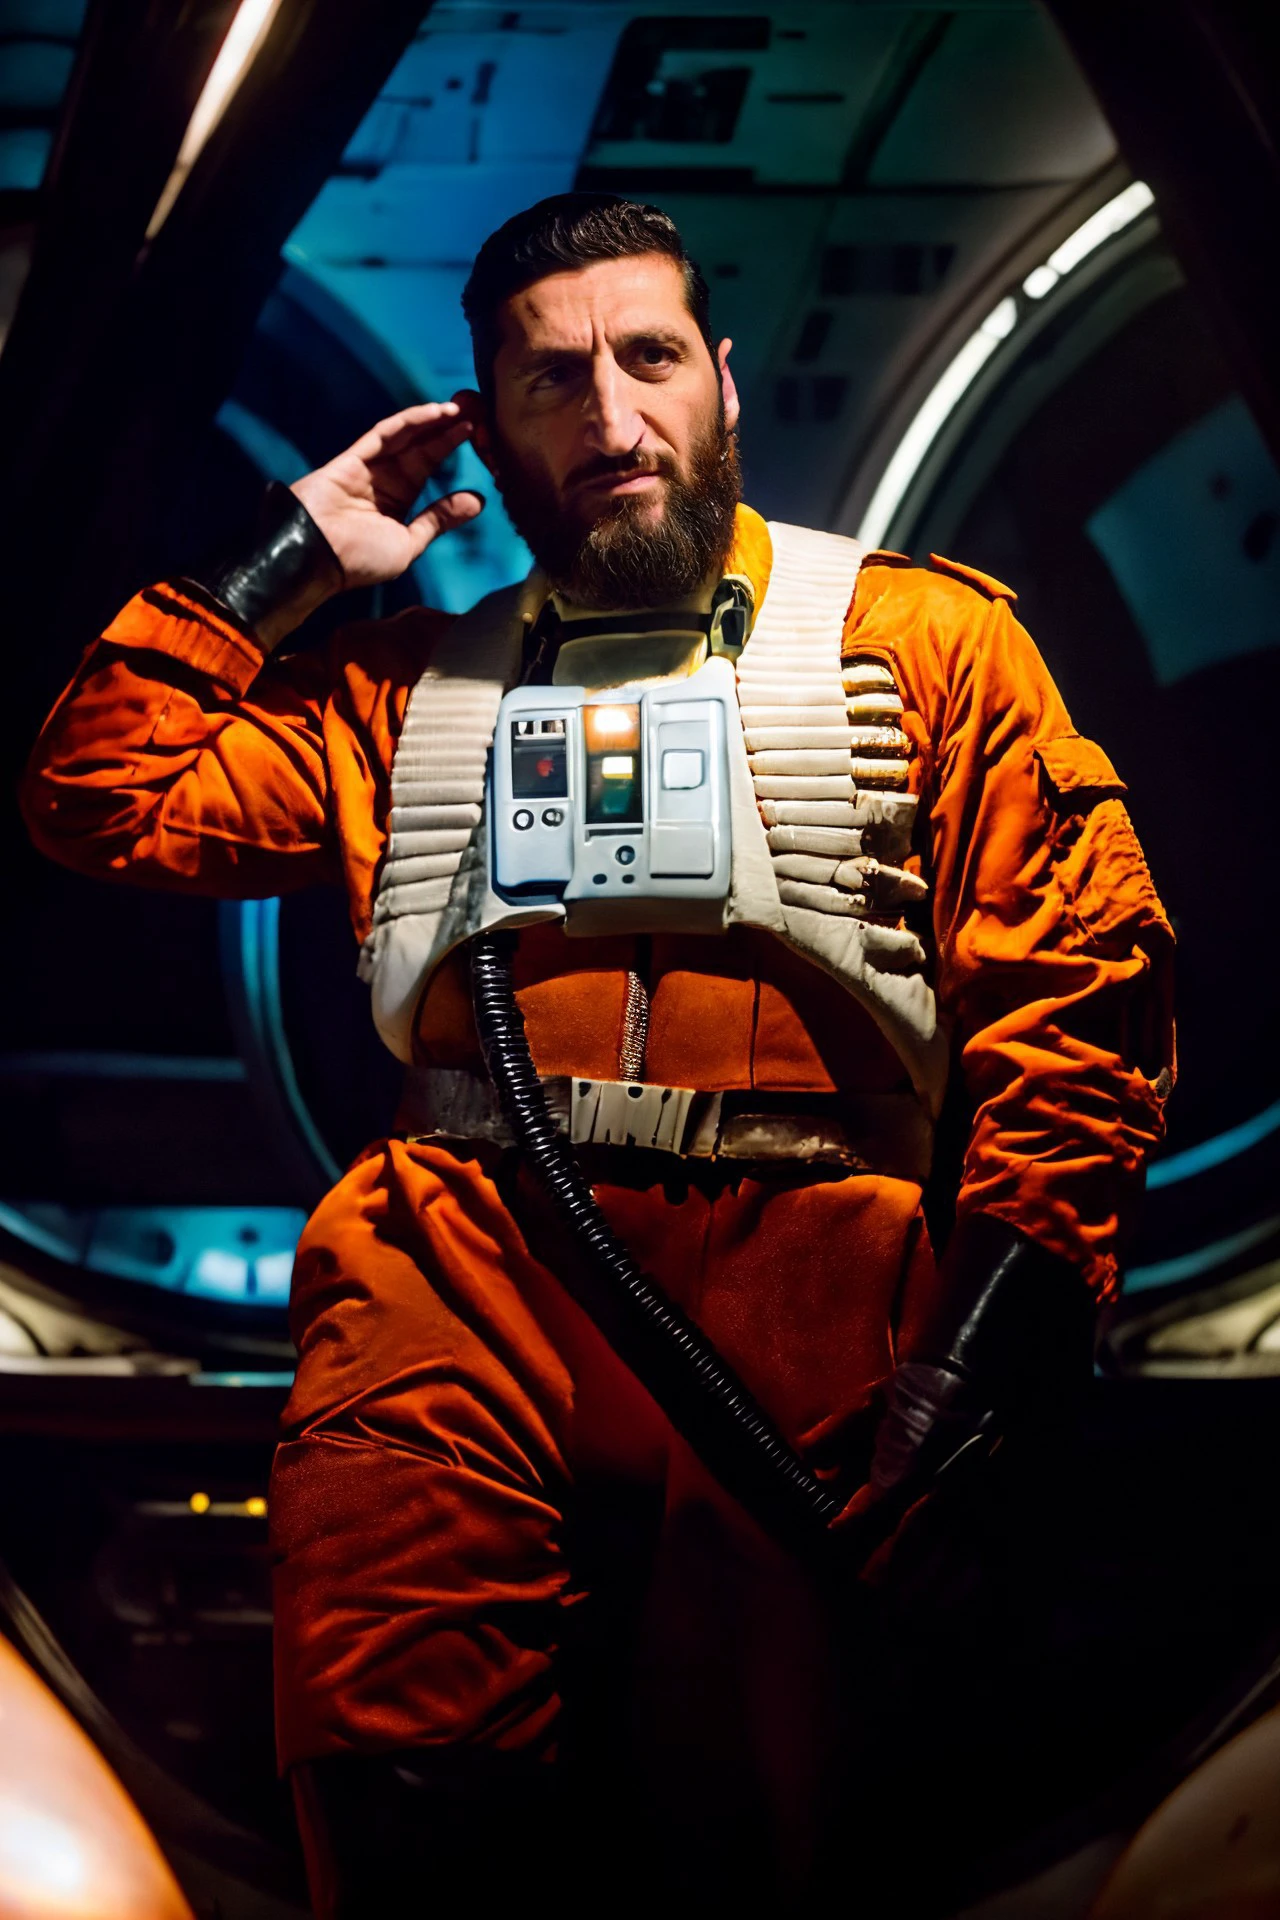 (Fares Fares:1.2) man with a (slicked-back hair:1.3) wearing a rebel pilot suit, inside a cockpit with one big wide panel (curved oval windows:1.2) showing the dark space, bright stars, (full:1.2) (long squarish:1.2) big (beard:1.2), devilish (confident looking down:1.2), 4k uhd, dslr, soft light, high quality, Fujifilm XT3  